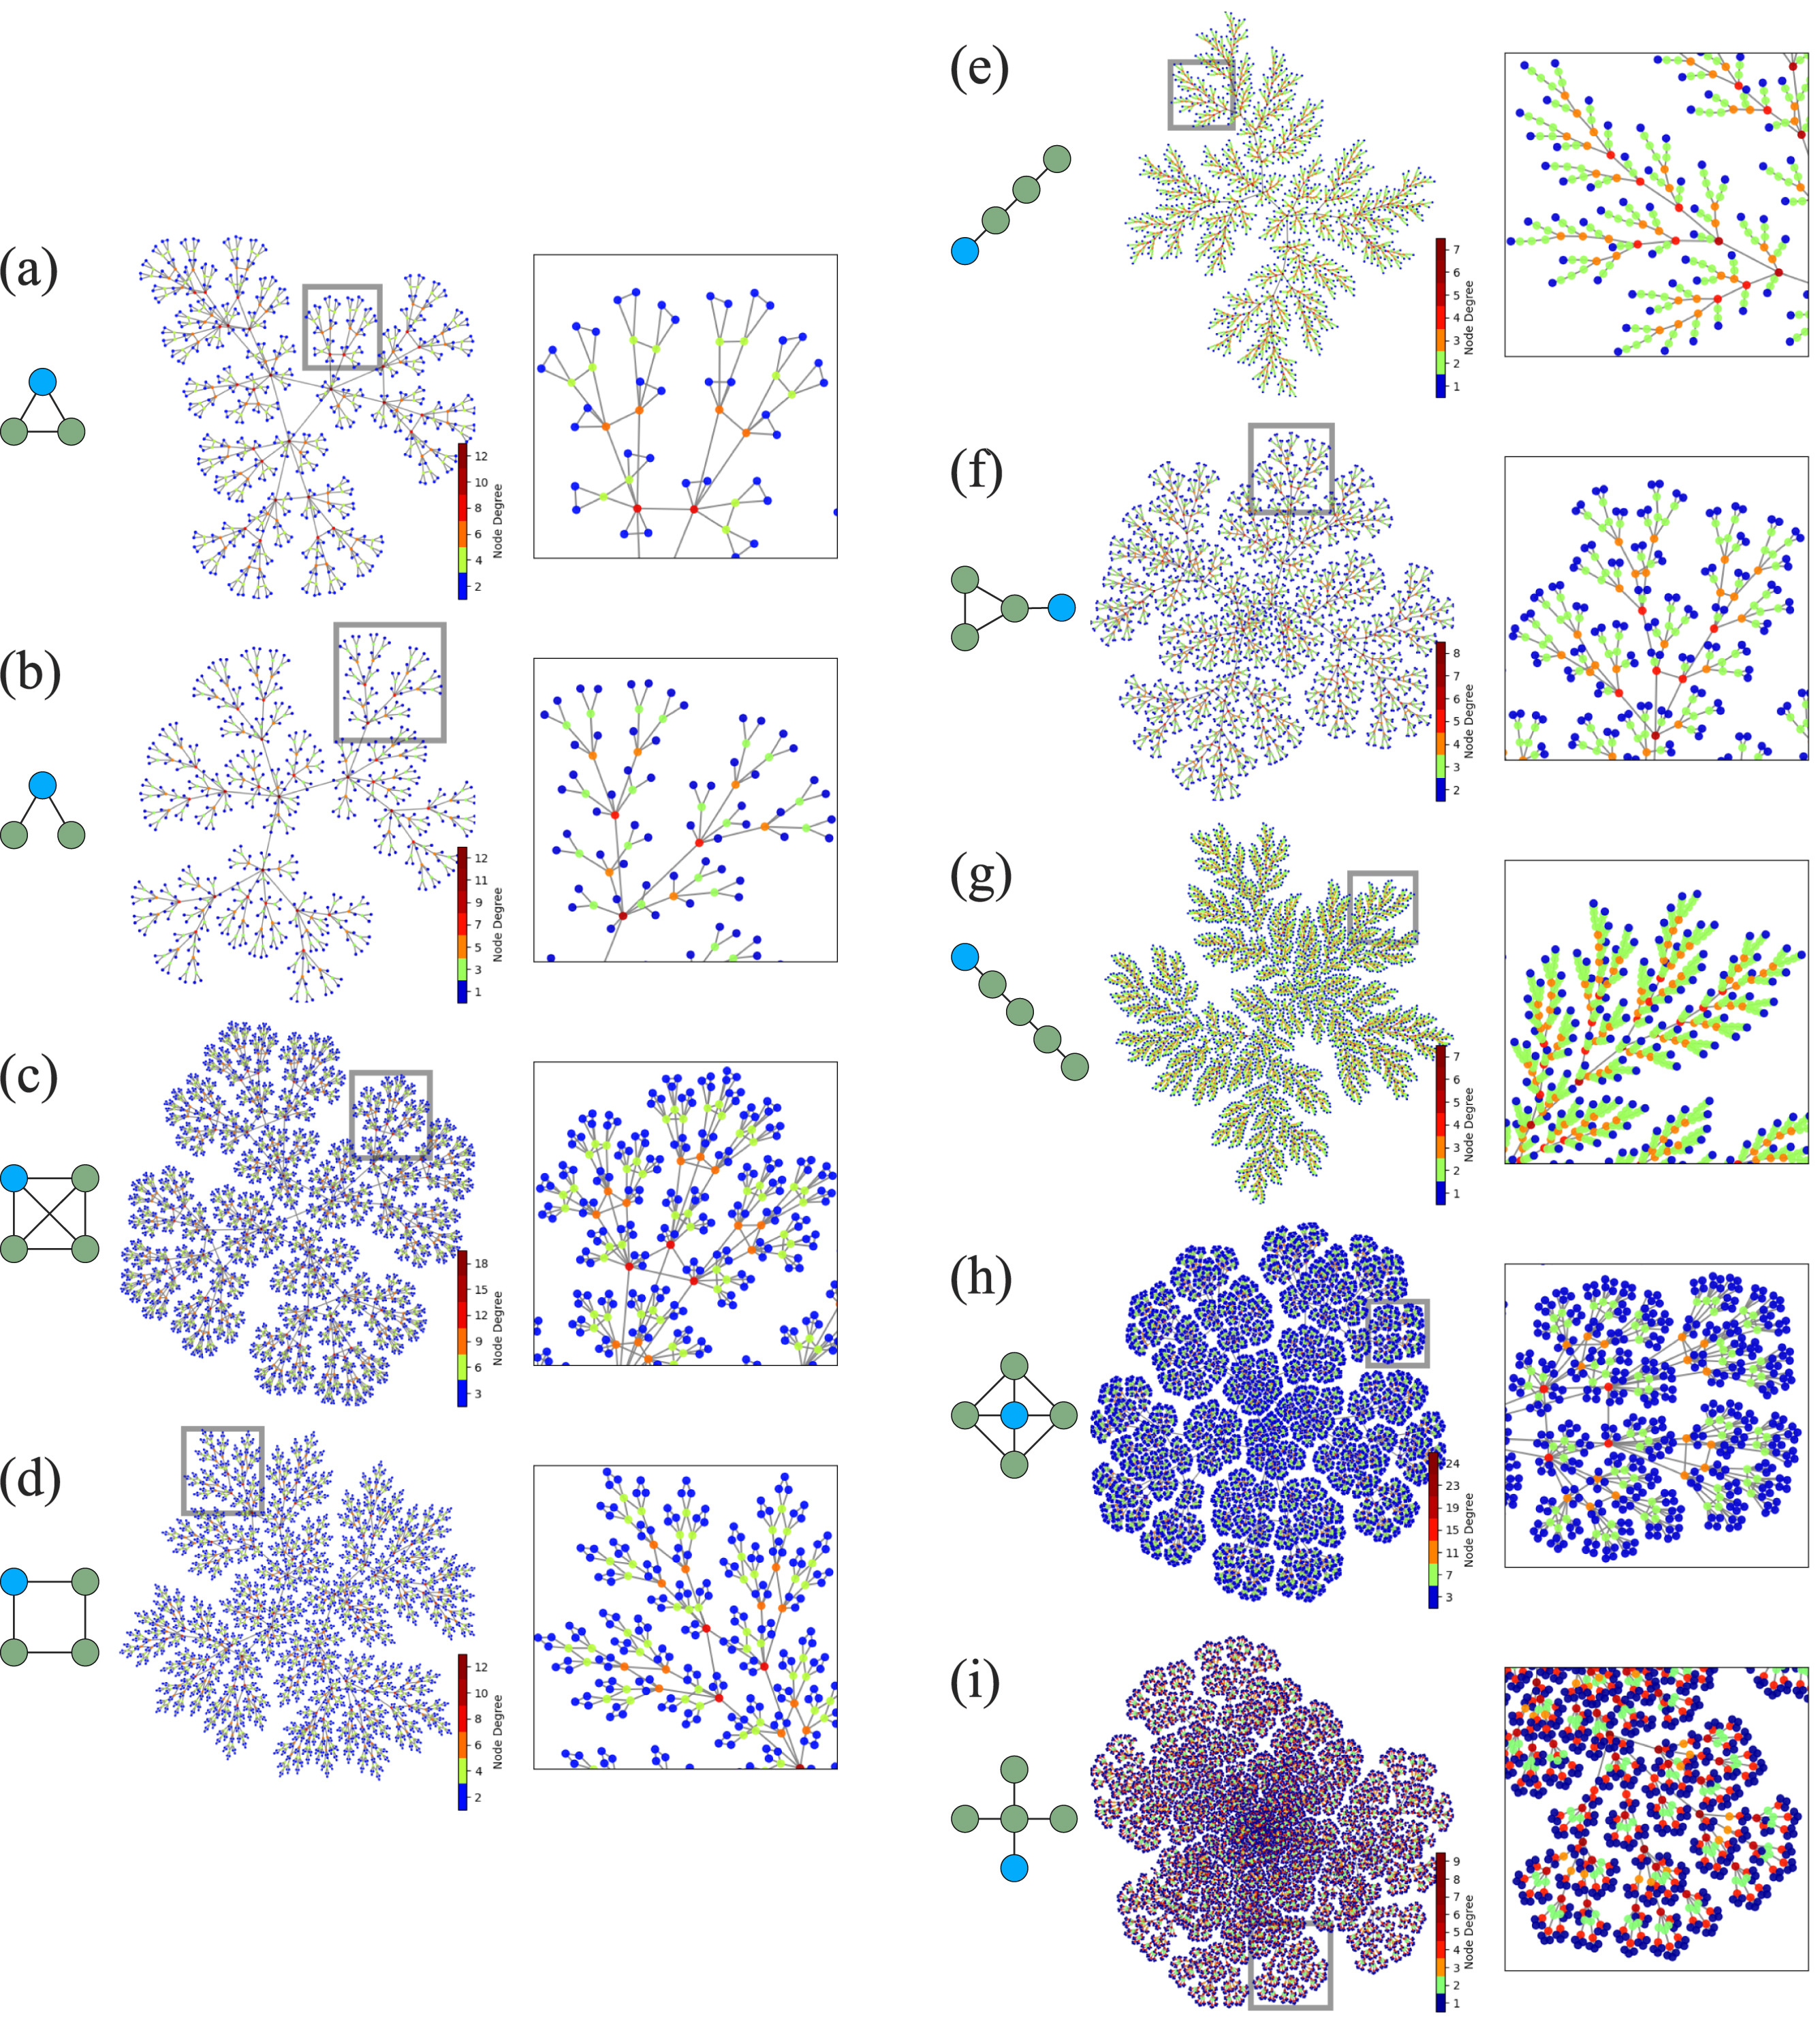 On the transient and equilibrium features of growing fractal complex networks.